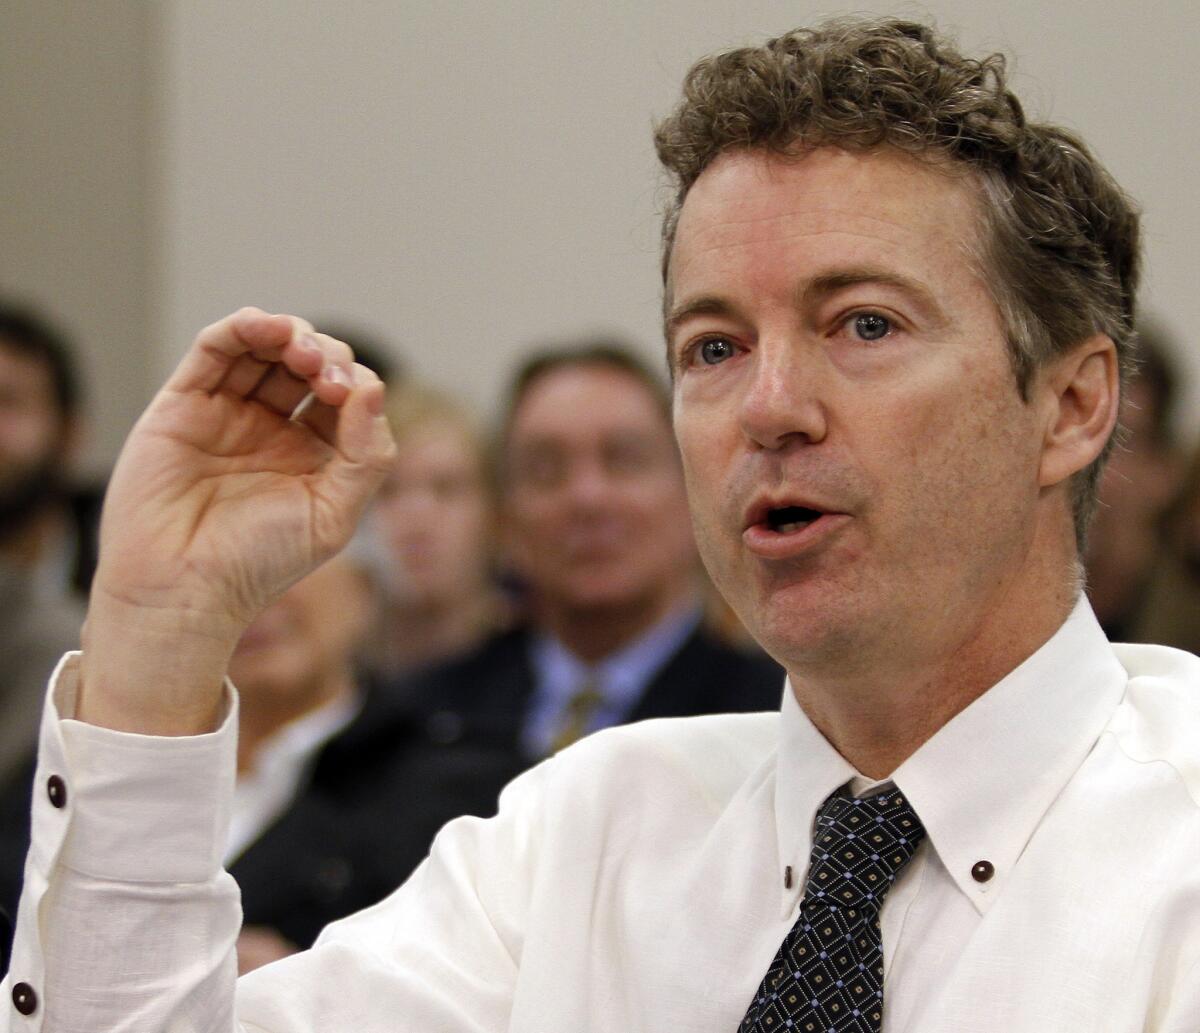 Sen. Rand Paul (R-Ky.) will deliver the tea party's response to President Obama's State of the Union address.